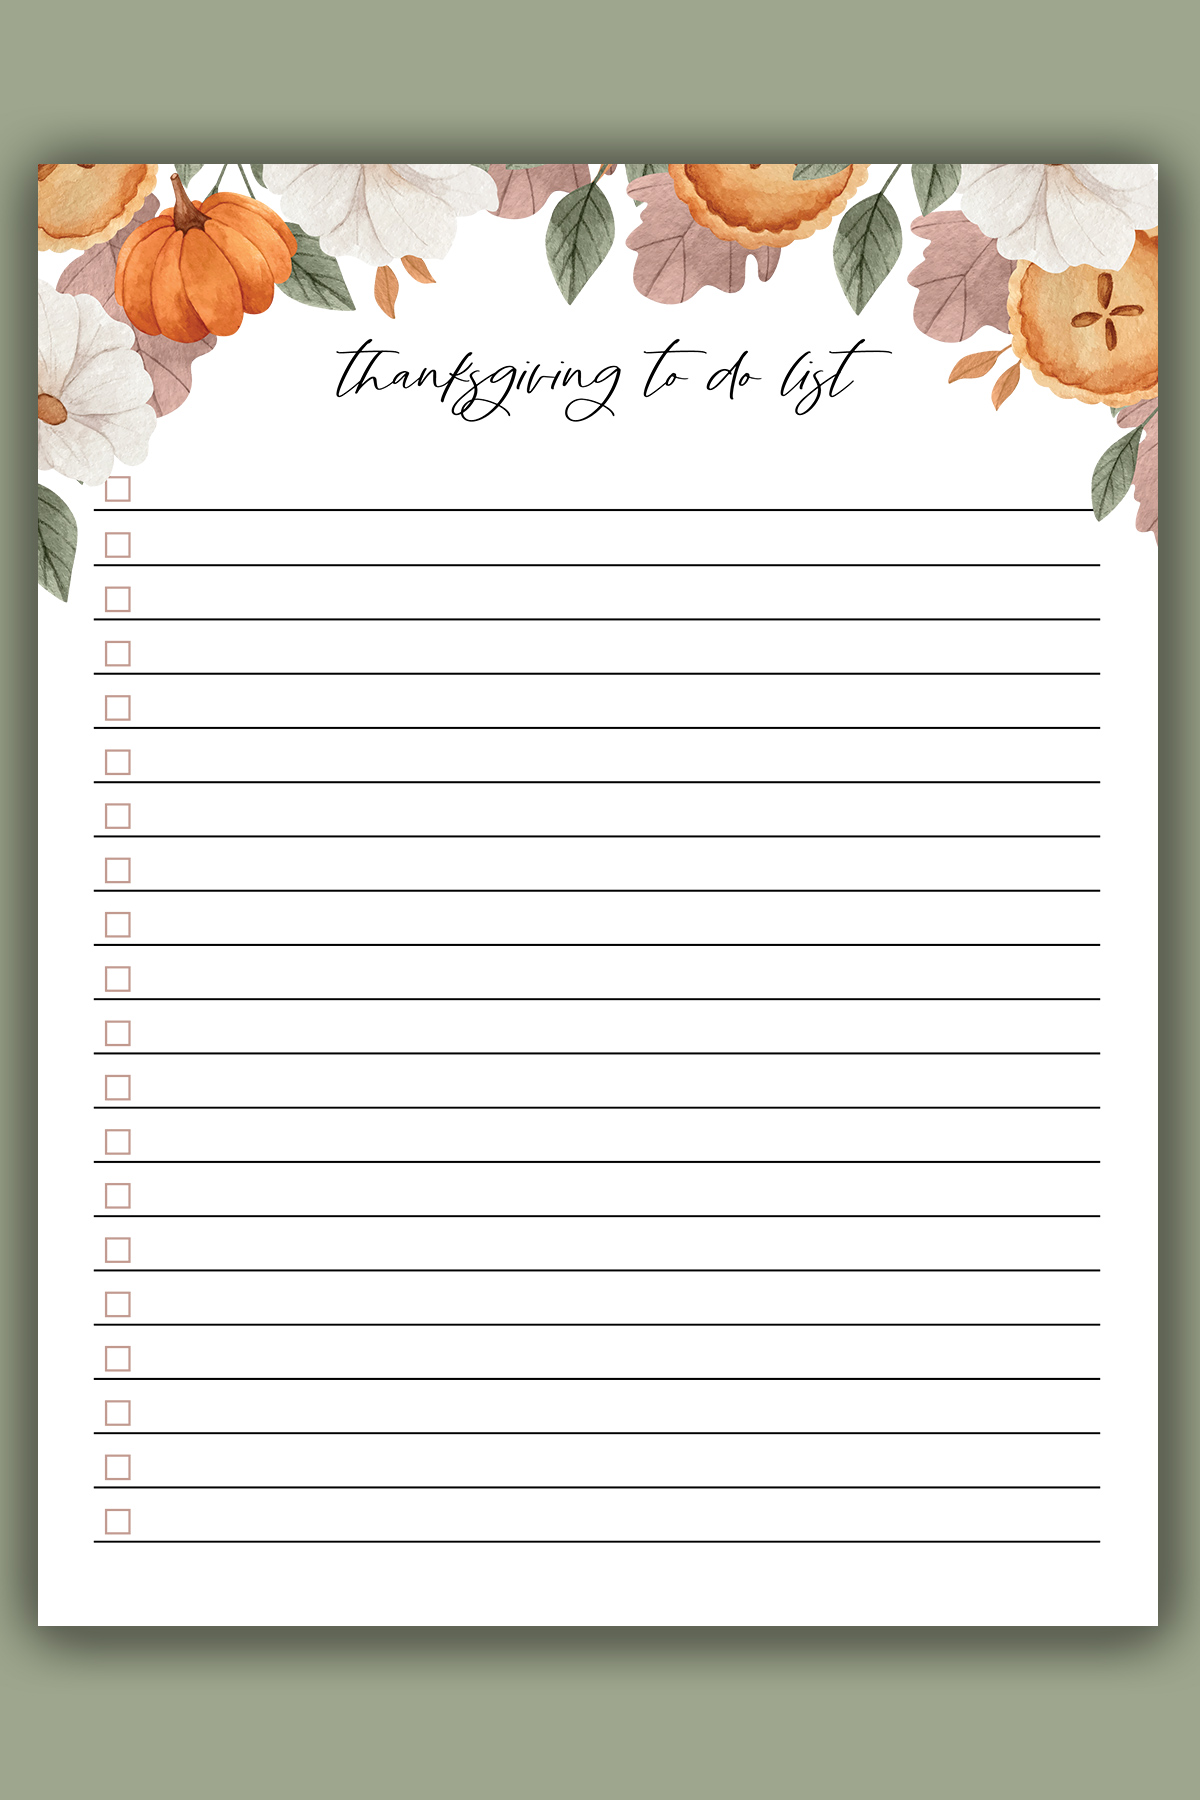 This image shows one of the free Thanksgiving to do lists you can get as part of the Thanksgiving shopping list printable, to do lists, and menu planner set at the end of this blog post.